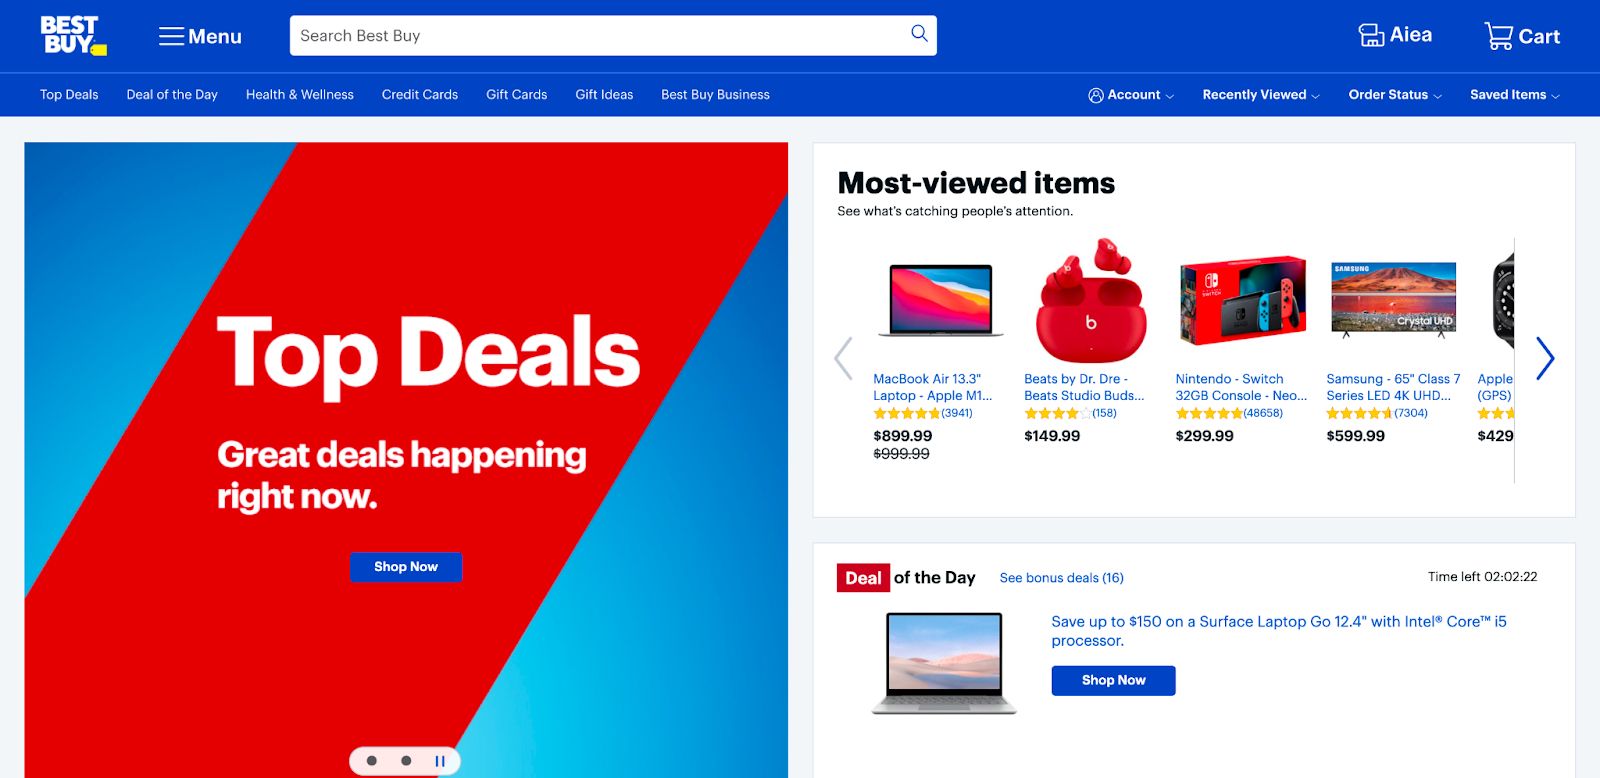 Overview of BestBuy  World's Leading eCommerce Platform for Technology